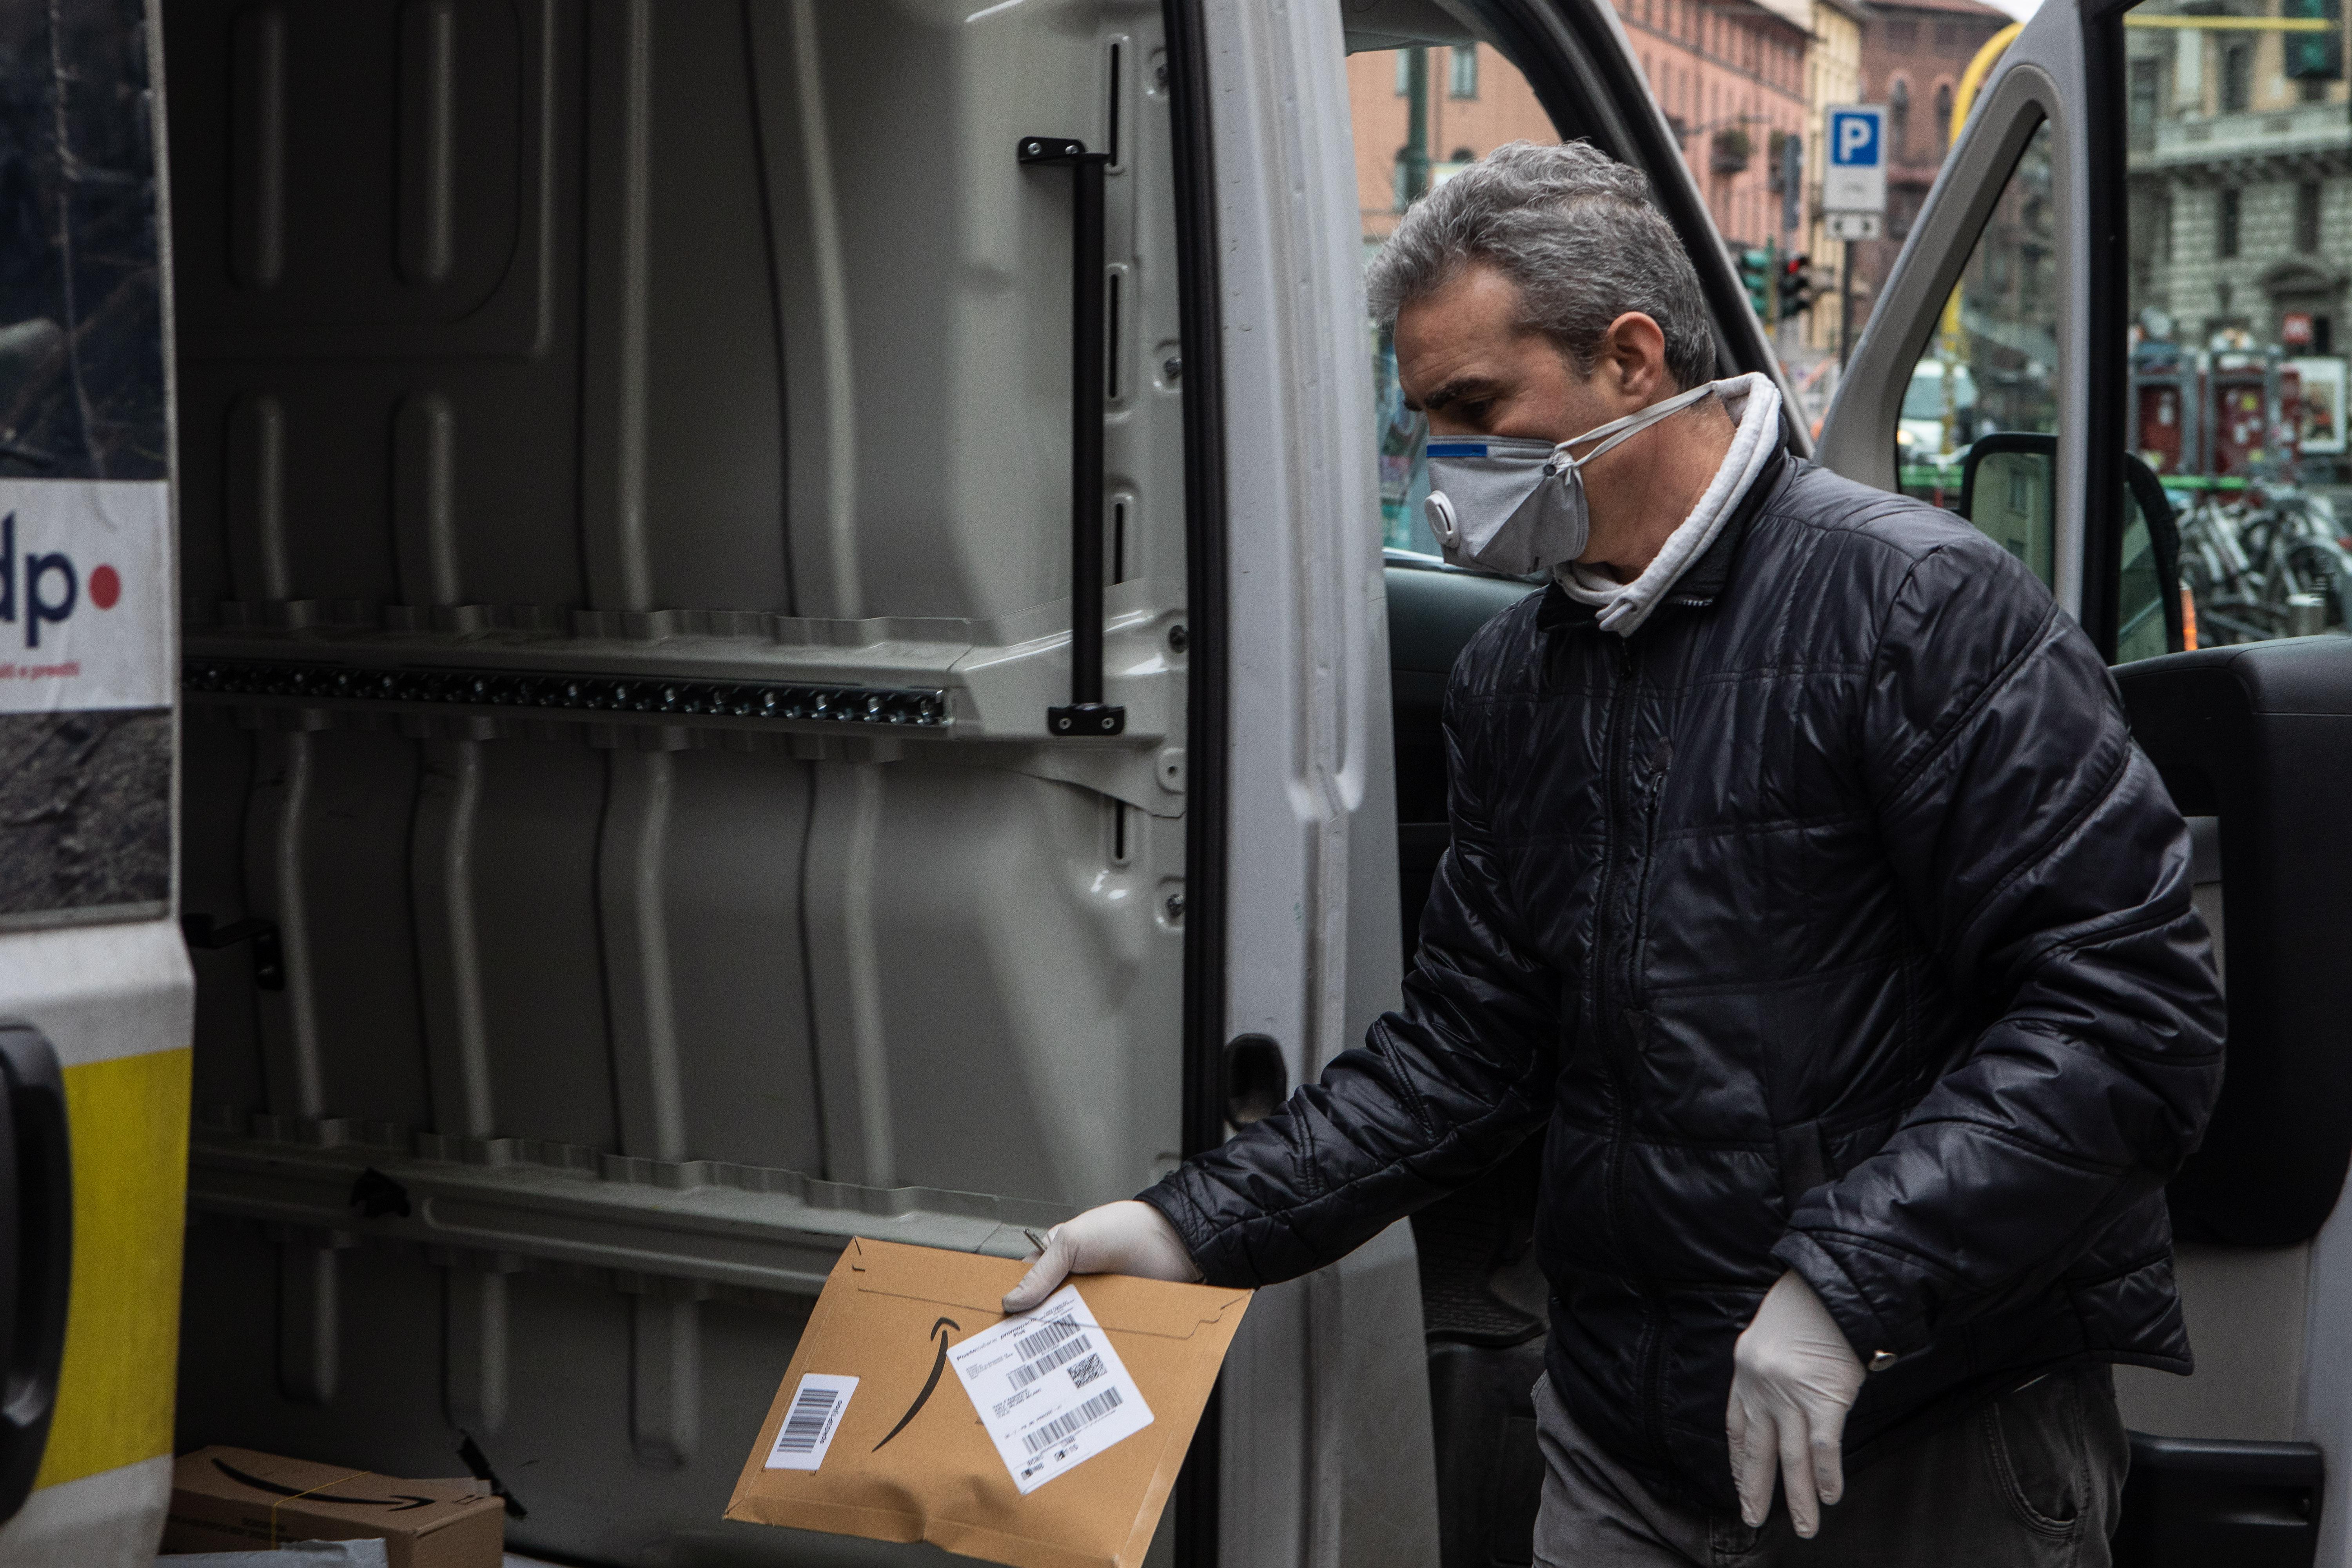 MILAN, ITALY - MARCH 11: A courier, wearing a respiratory mask, handles an Amazon parcel on March 11, 2020 in Milan, Italy. The Italian Government has strengthened up its quarantine rules, shutting all commercial activities except for pharmacies, food shops, gas stations, tobacco stores and news kiosks in a bid to stop the spread of the novel coronavirus. (Photo by Emanuele Cremaschi/Getty Images)